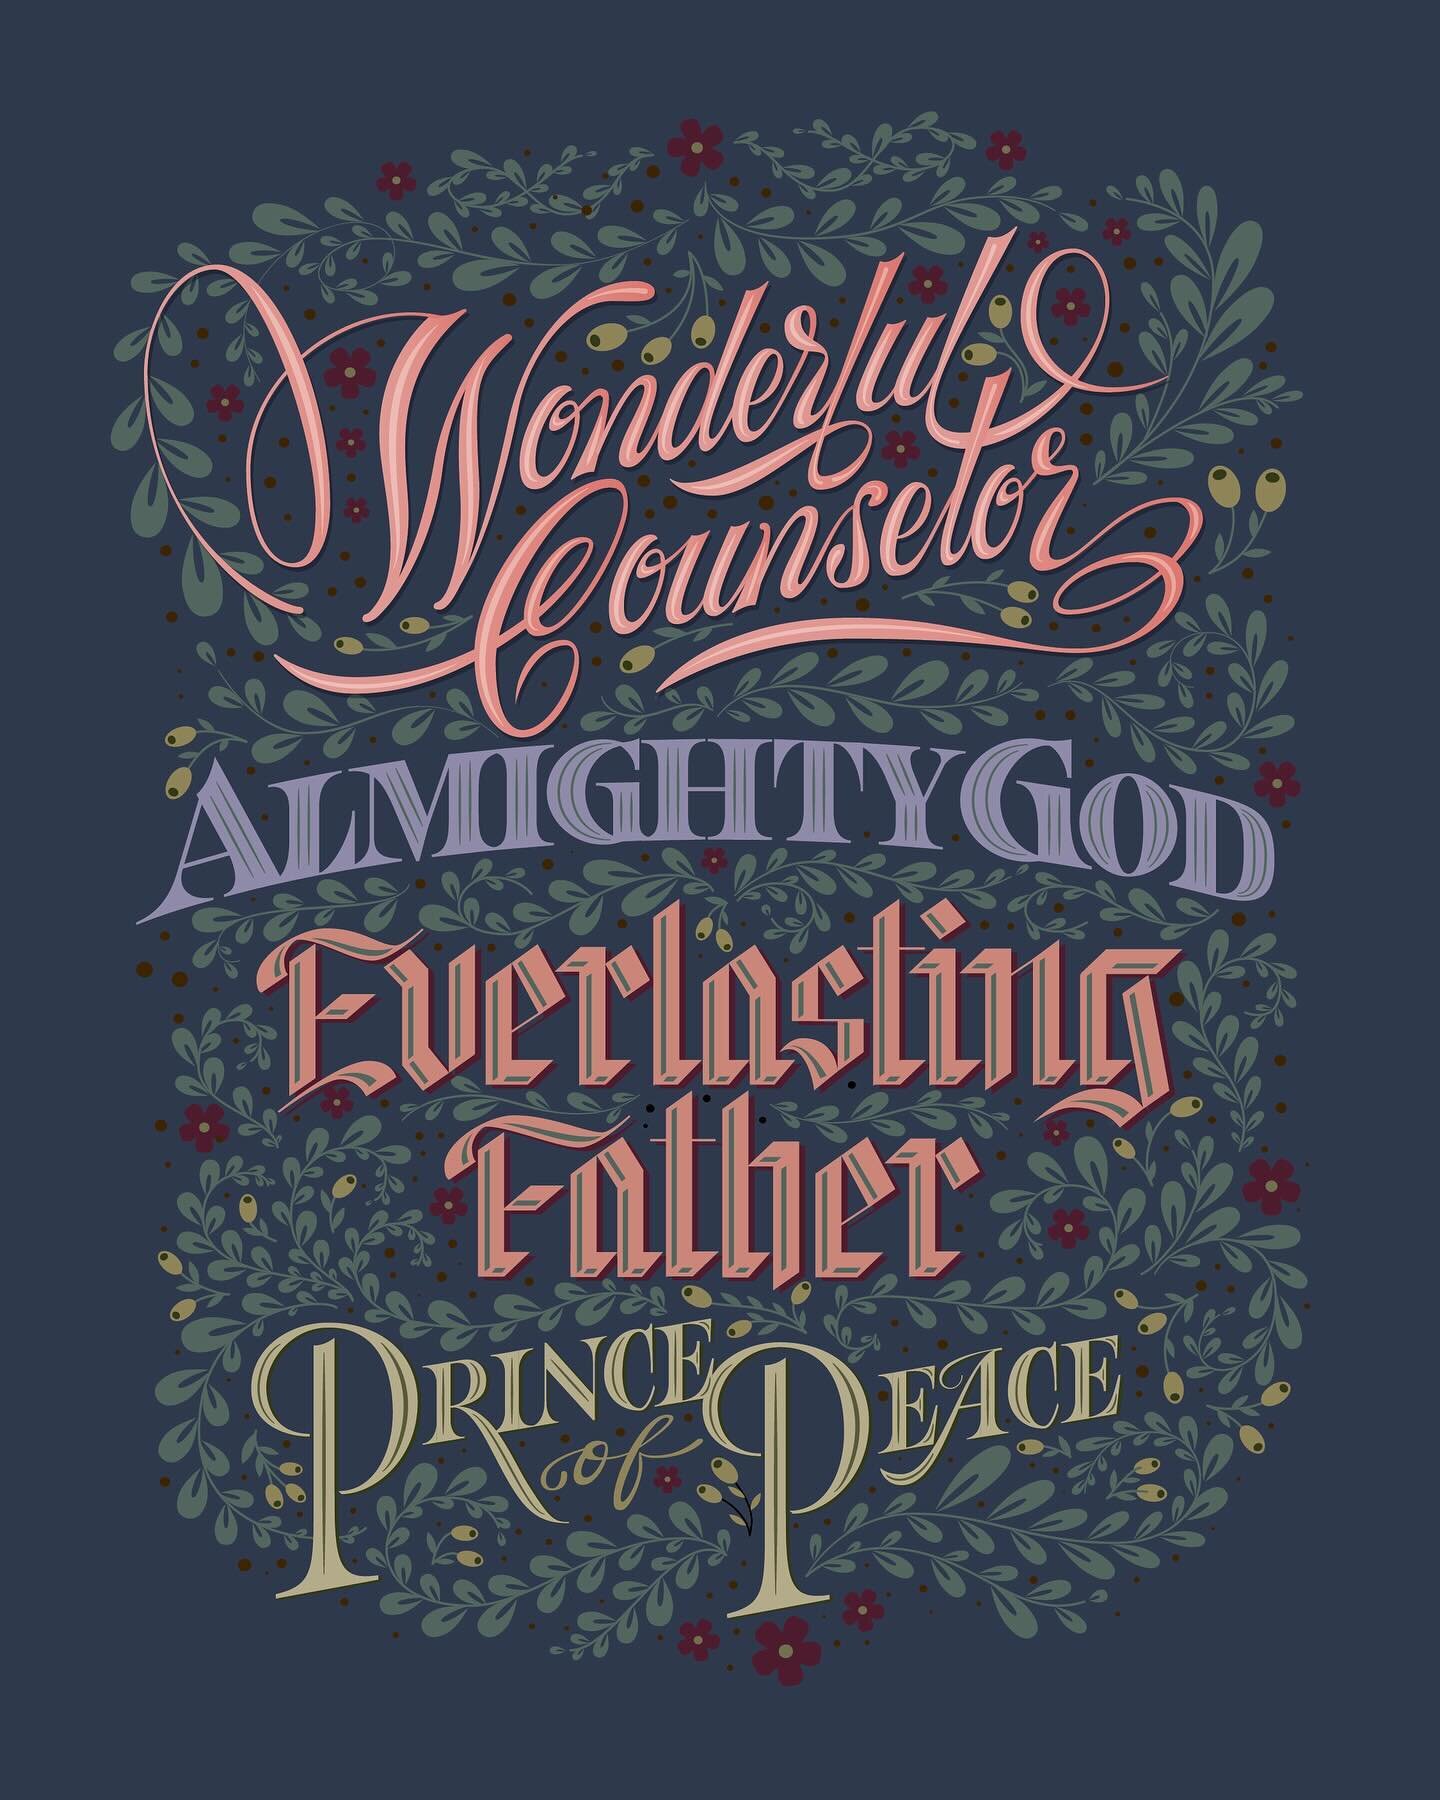 &ldquo;For to us a child is born, to us a son is given; and the government shall be upon his shoulder, and his name shall be called Wonderful Counselor, Mighty God,
Everlasting Father, Prince of Peace.&rdquo; Isaiah 9:6

Handel&rsquo;s Messiah, aside